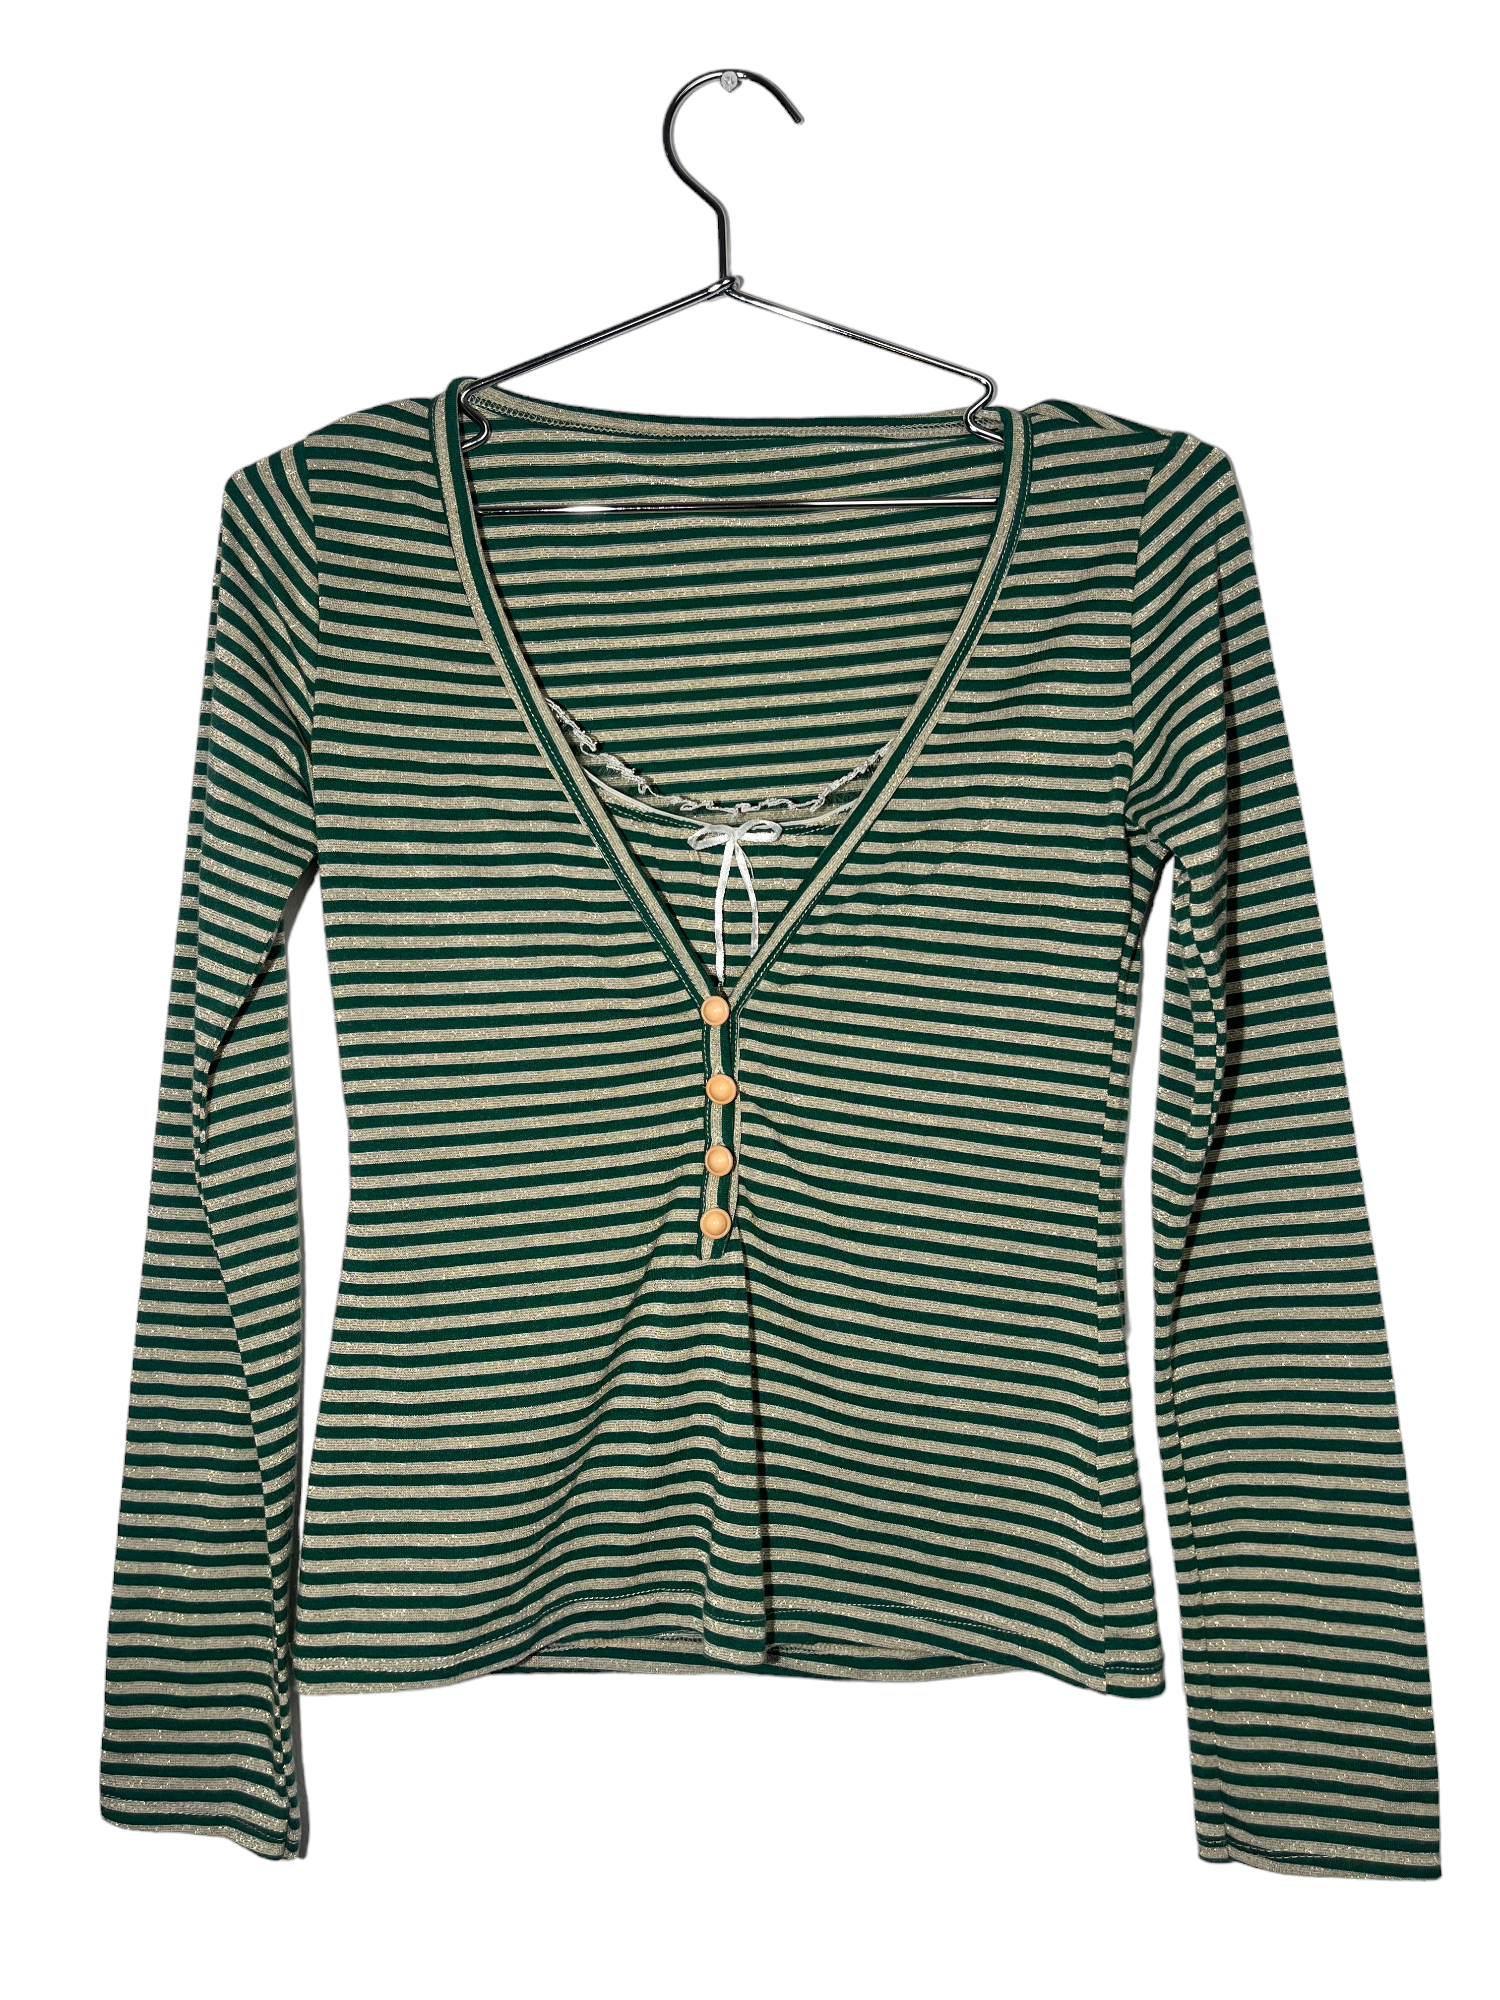 Green & Gold Striped Long Sleeve Top